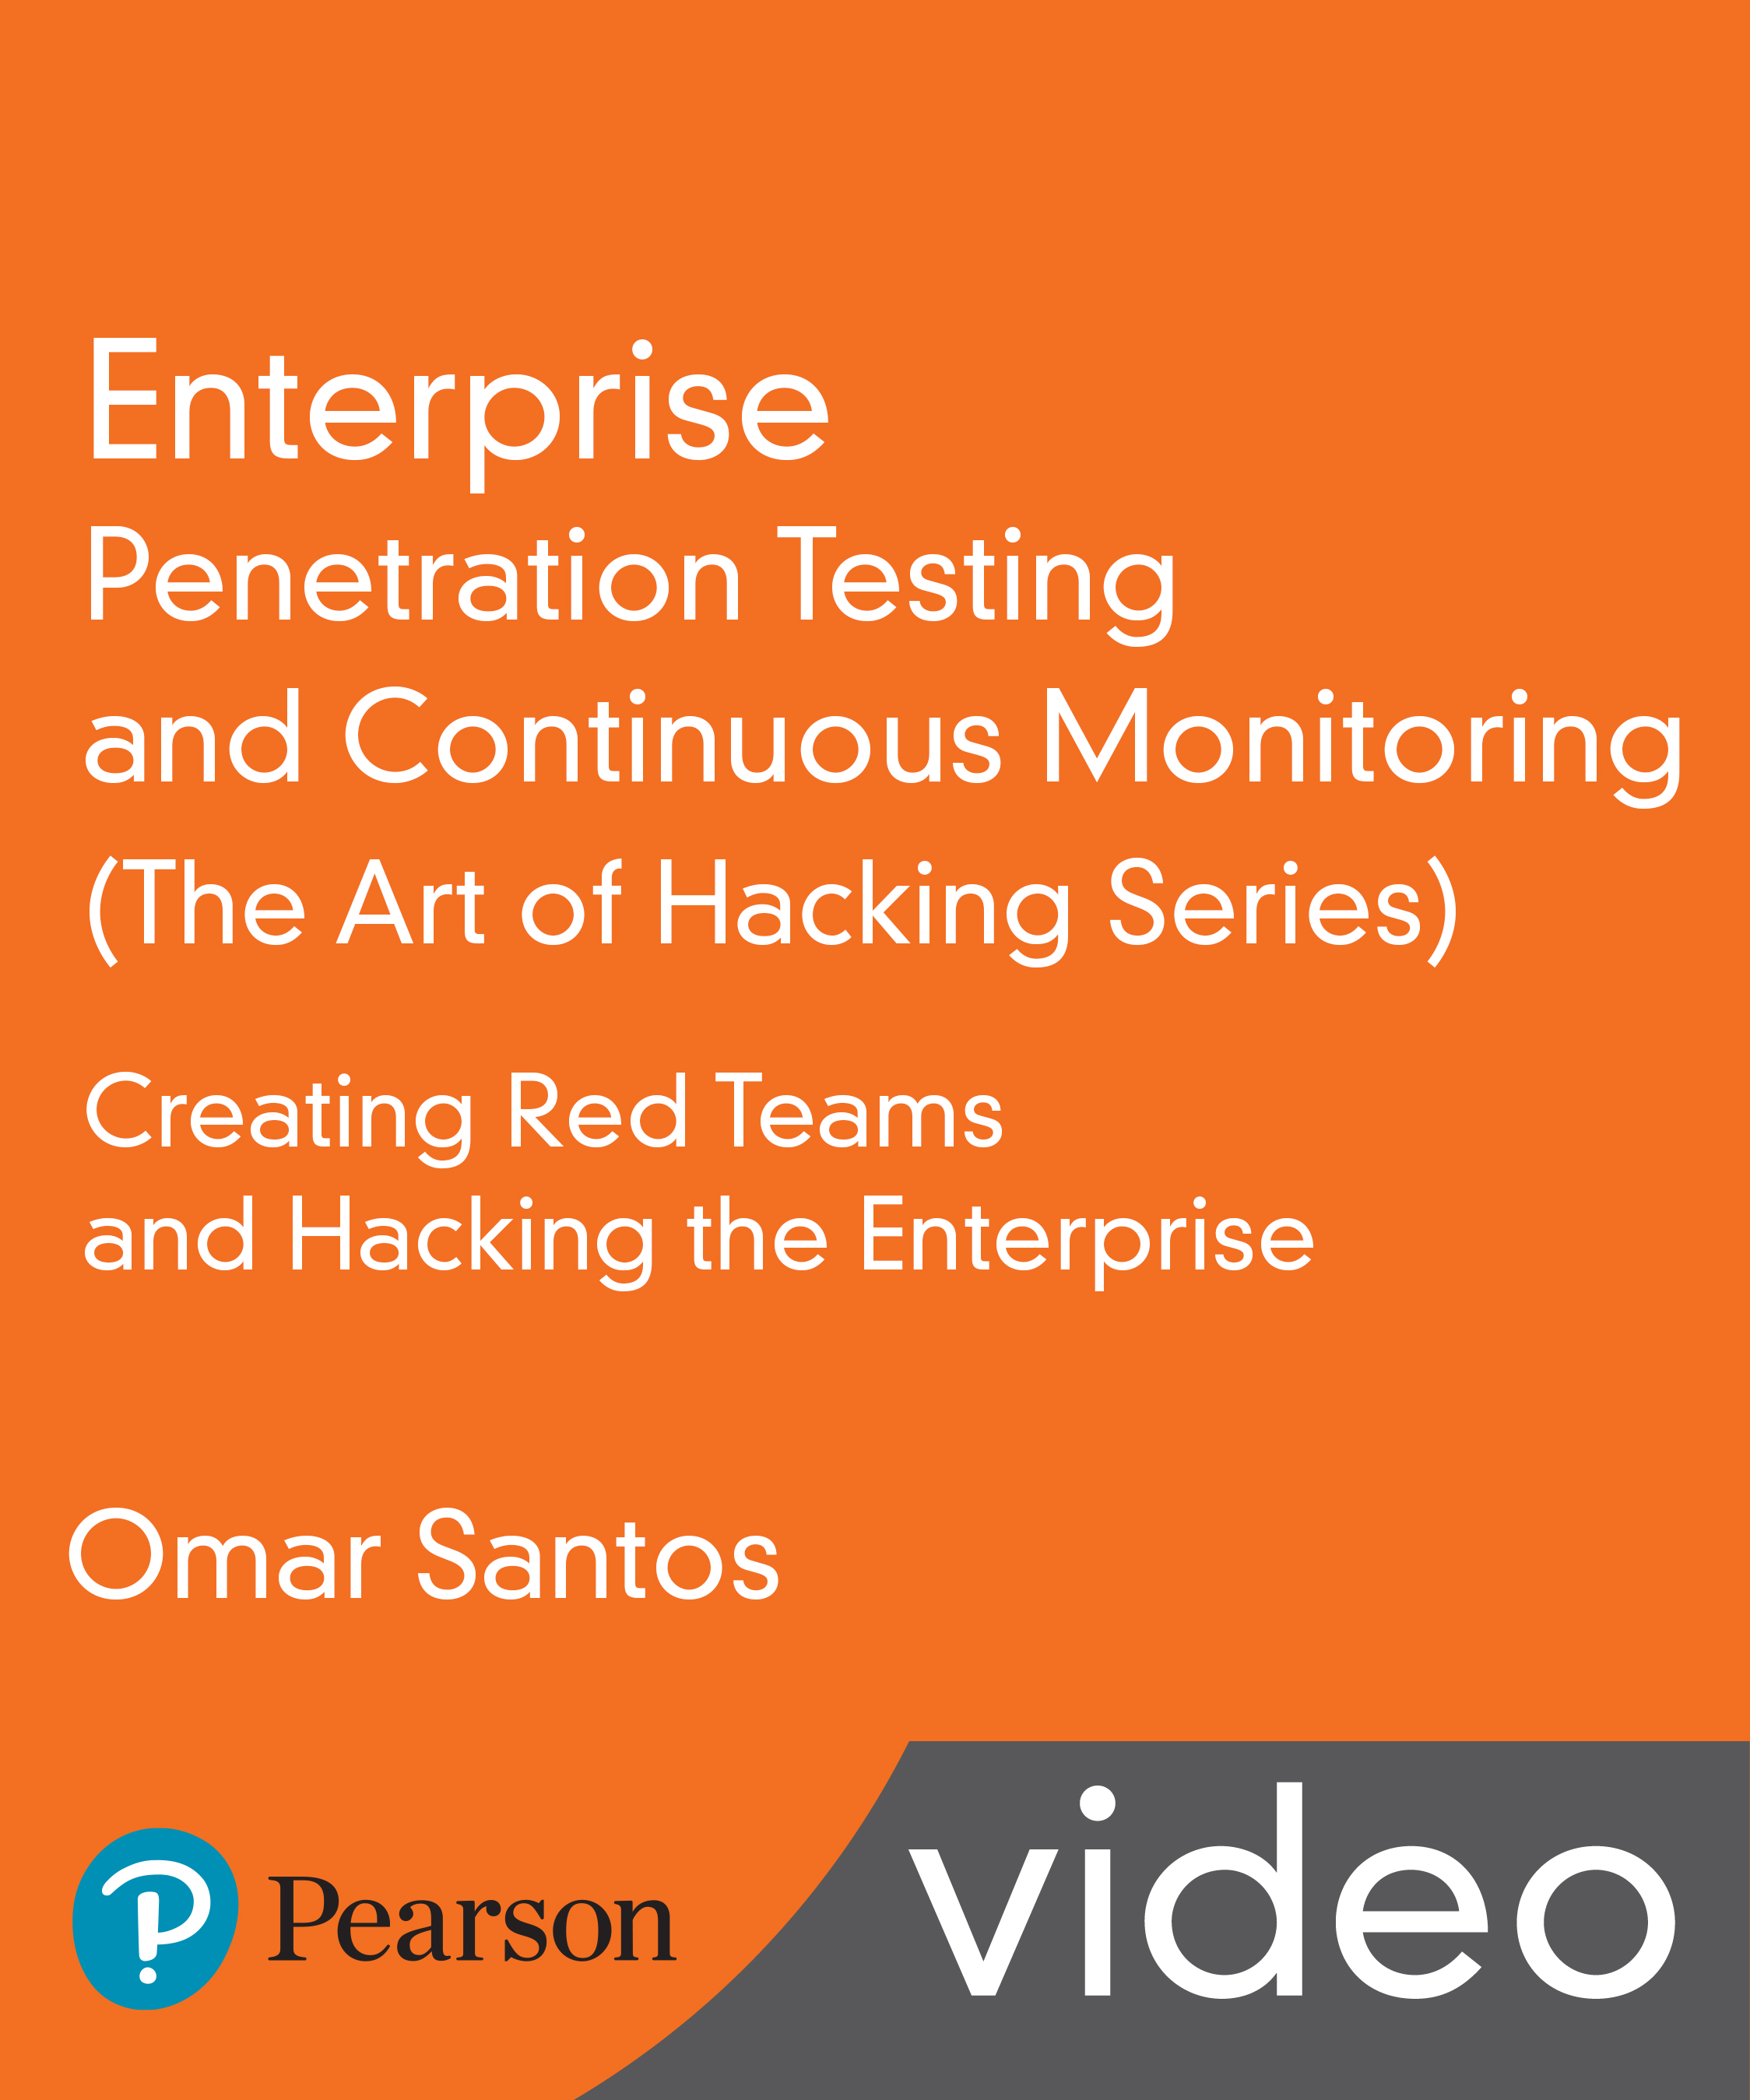 Enterprise Penetration Testing and Continuous Monitoring (The Art of Hacking Series) LiveLessons: Creating Red Teams and Hacking the Enterprise